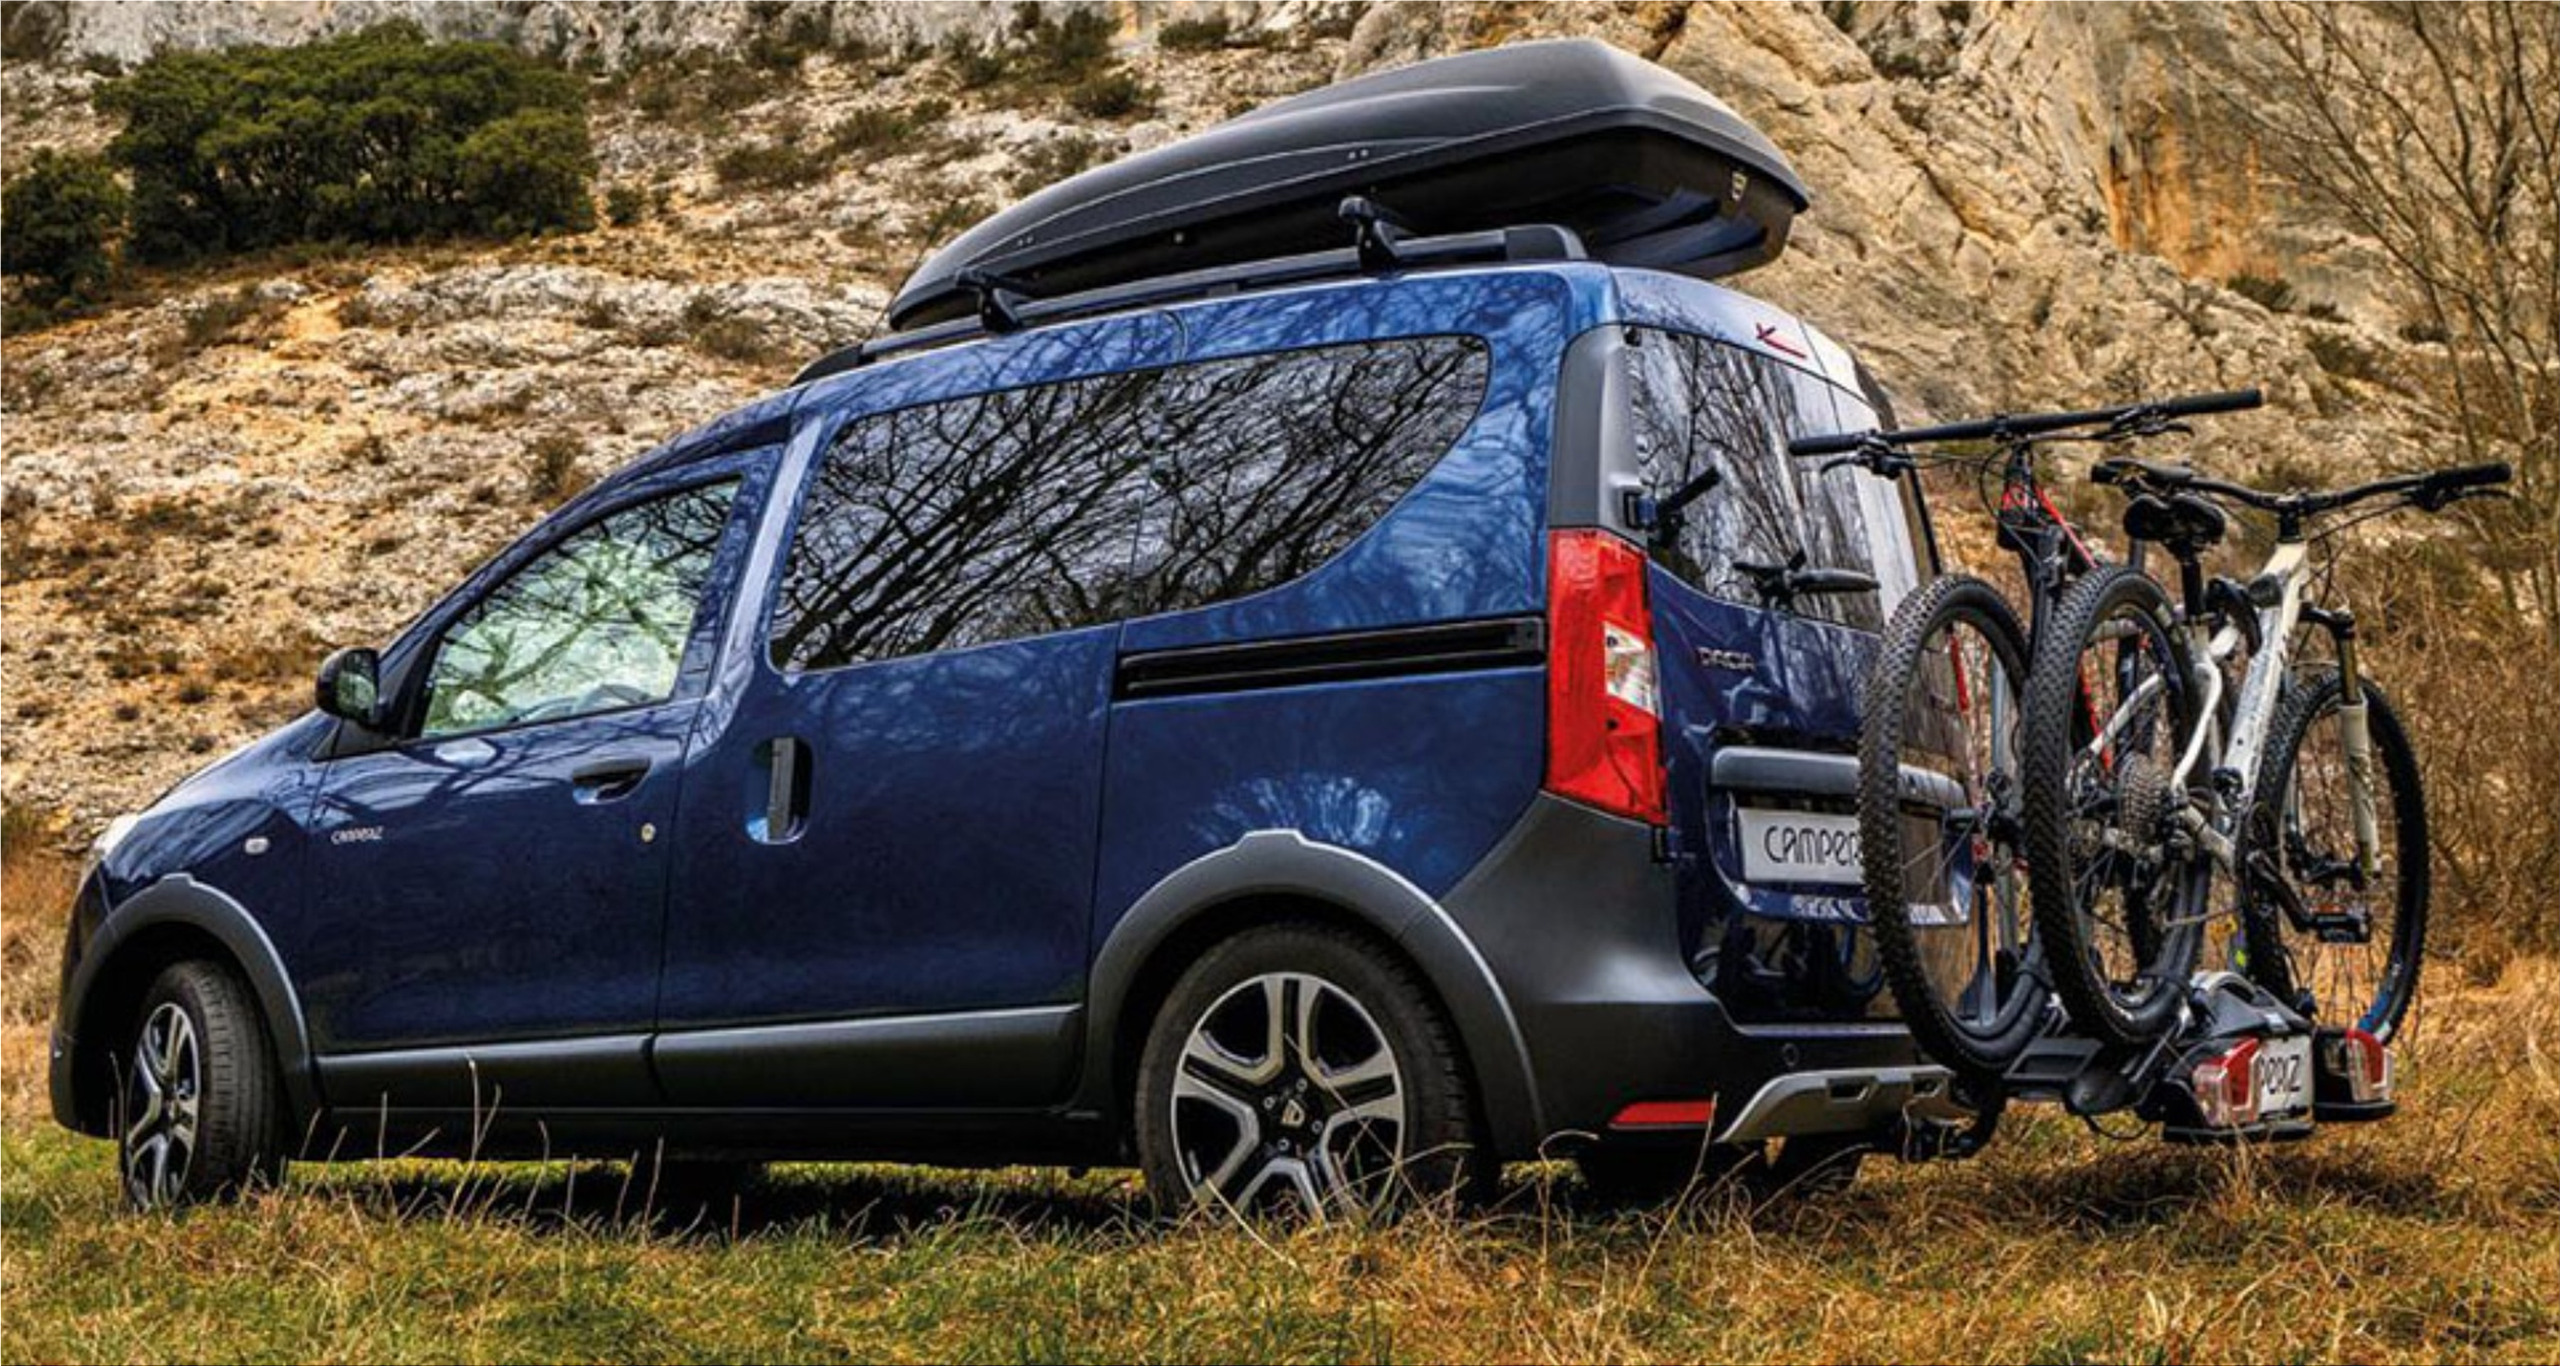 Dacia Dokker Yevana Camper Will Only Cost You Around $22,000